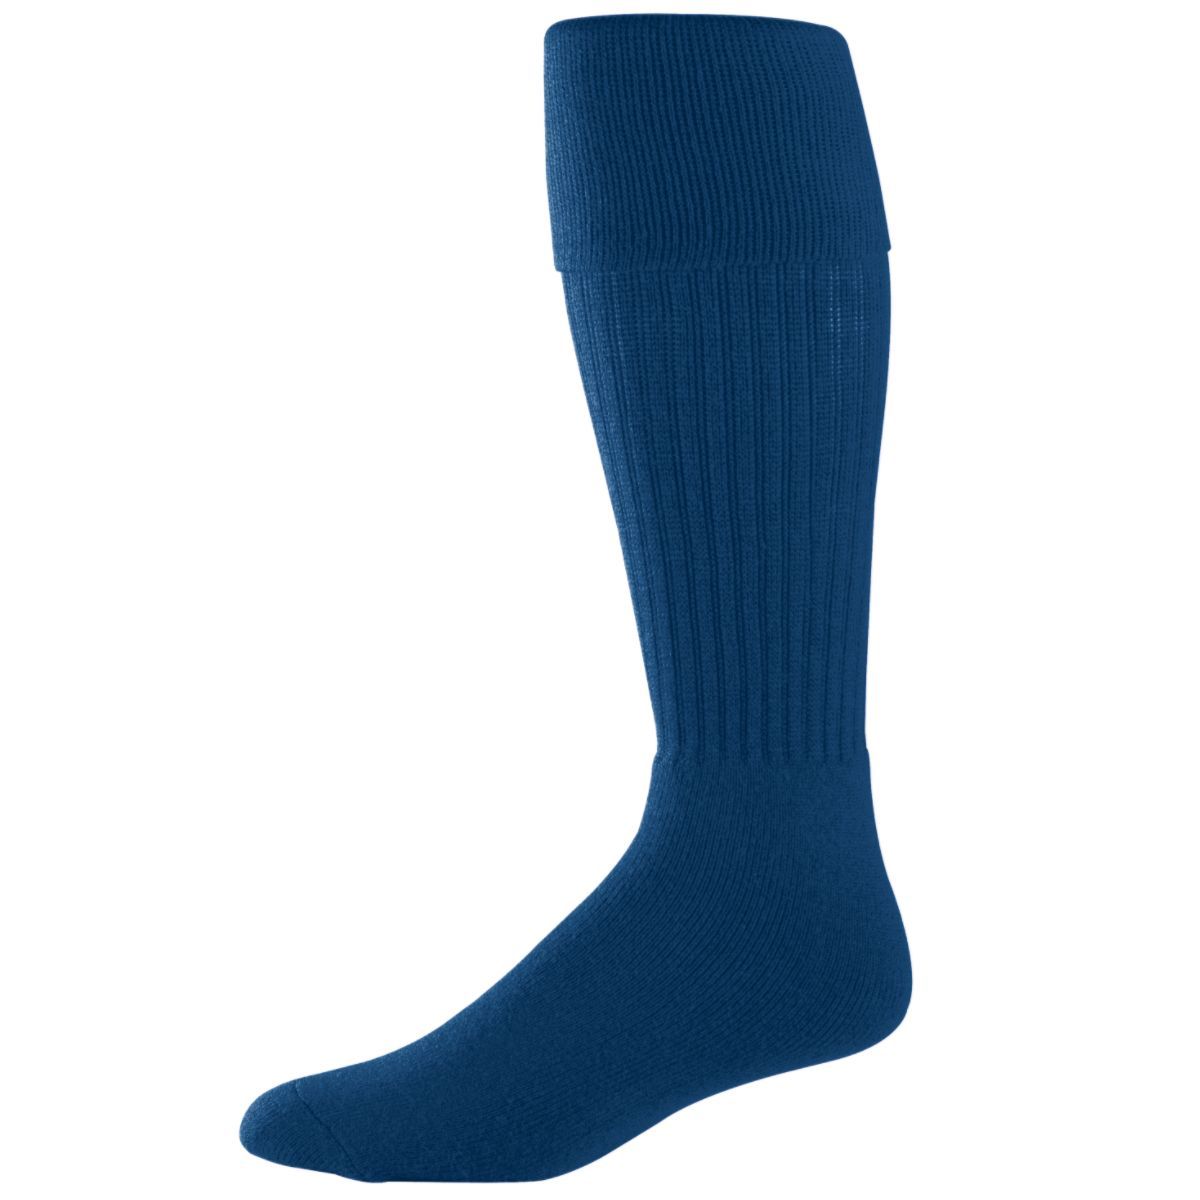 Augusta Sportswear Soccer Sock in Navy  -Part of the Accessories, Augusta-Products, Accessories-Socks, Soccer, All-Sports-1 product lines at KanaleyCreations.com